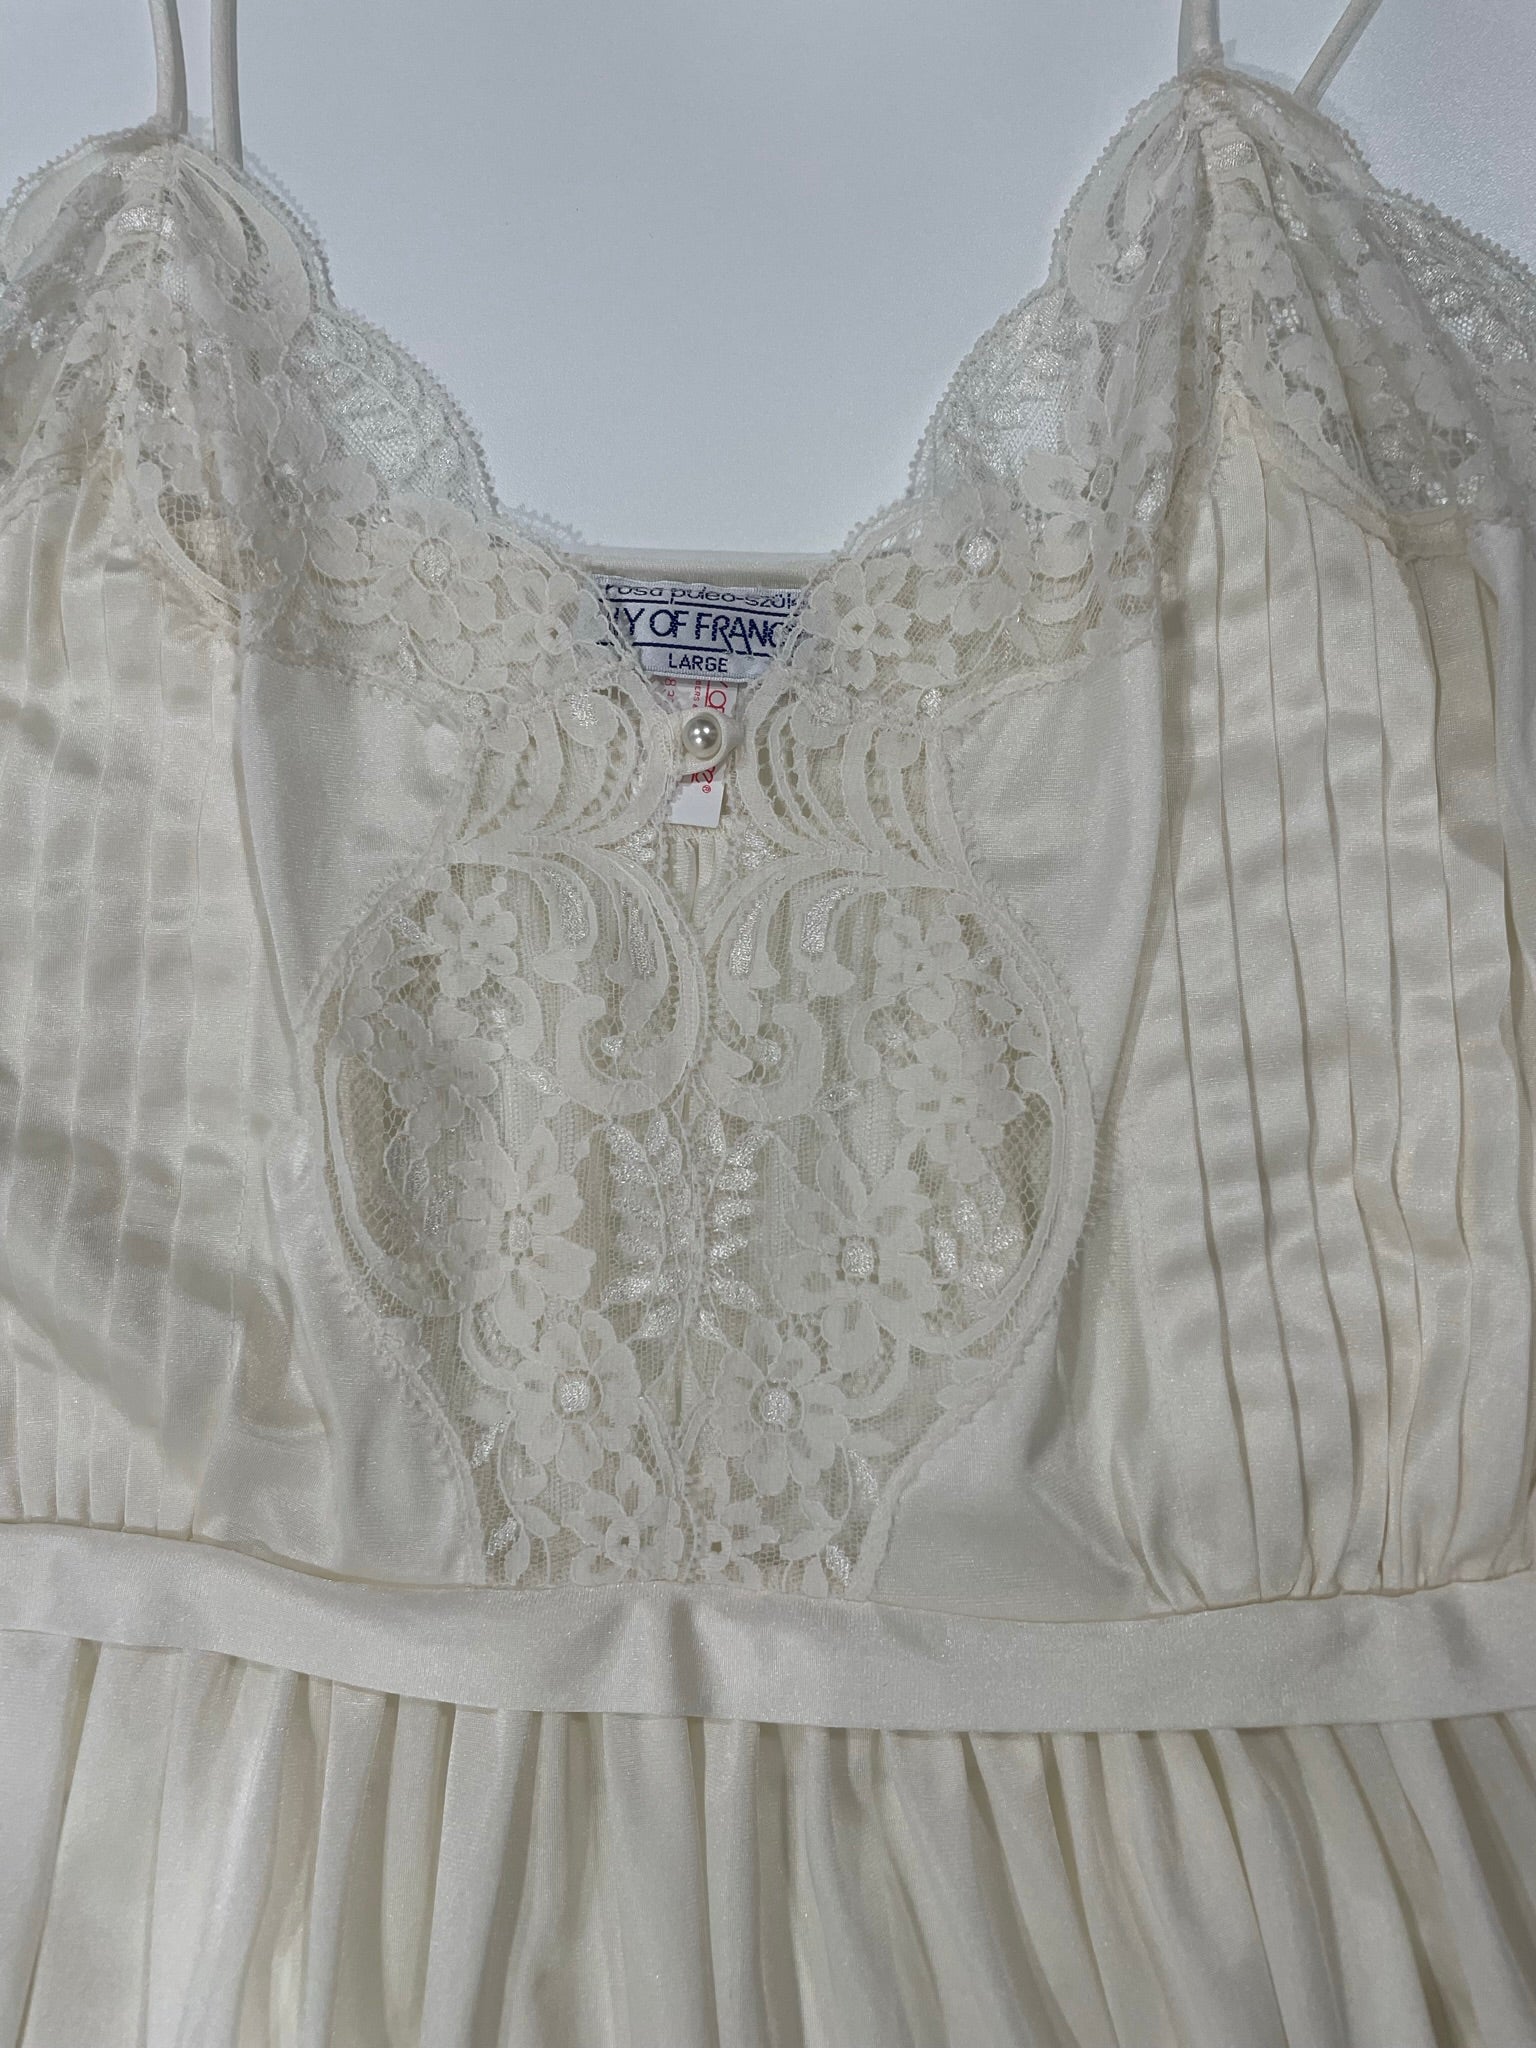 Vintage 1970s Lily of France Peignoir Nightgown and Robe Set